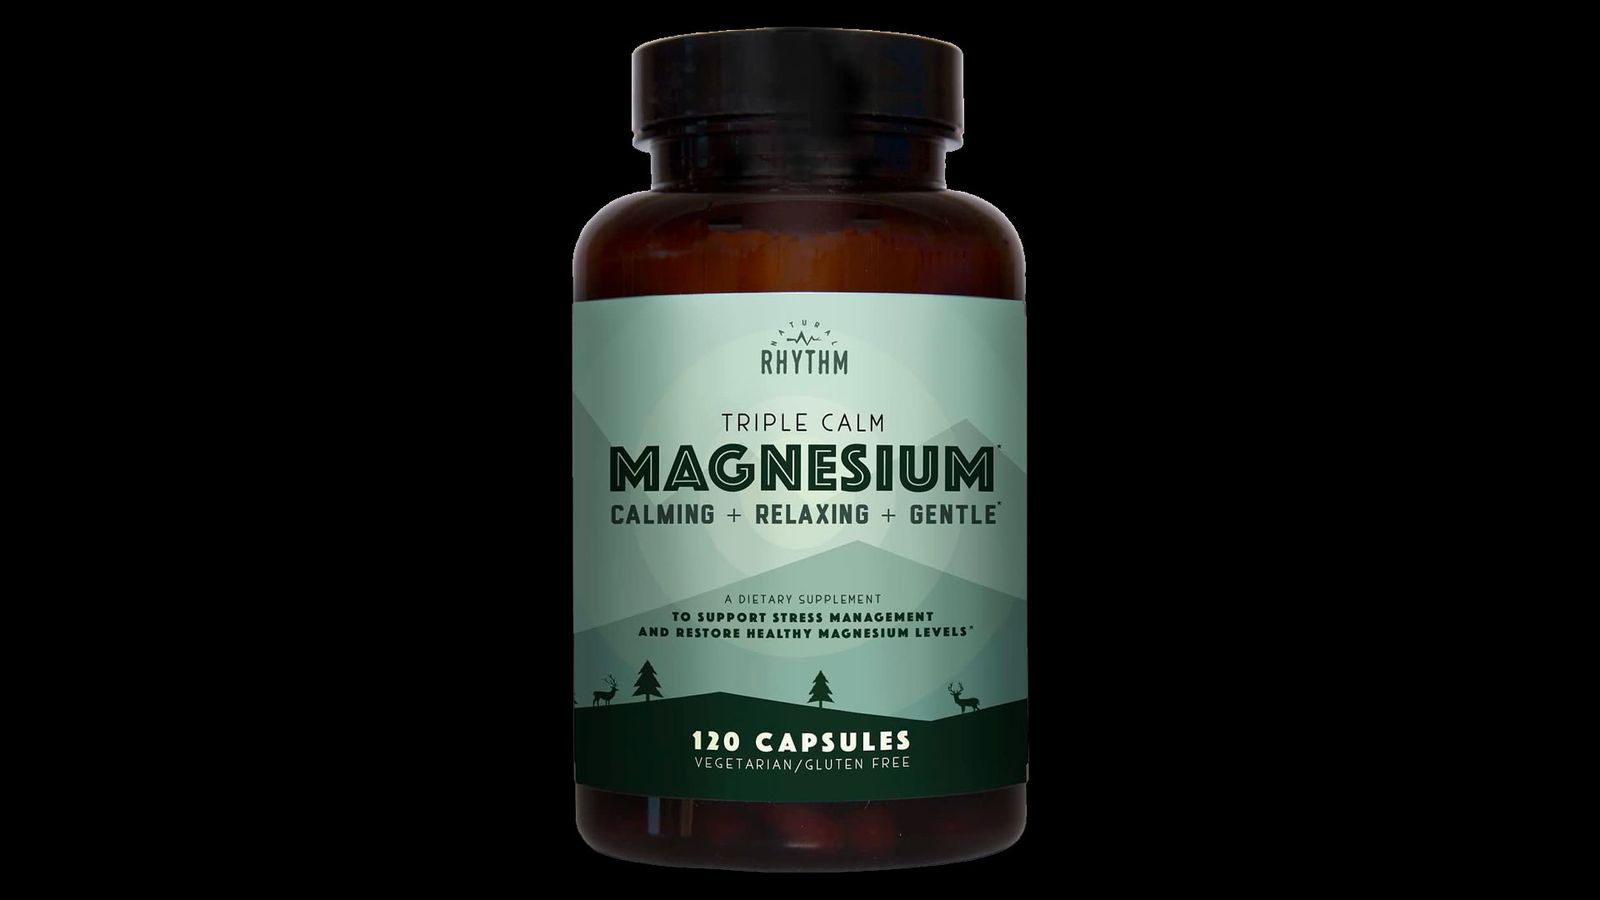 Natural Rhythm Triple Calm Magnesium product image of a brown bottle with light green branding.